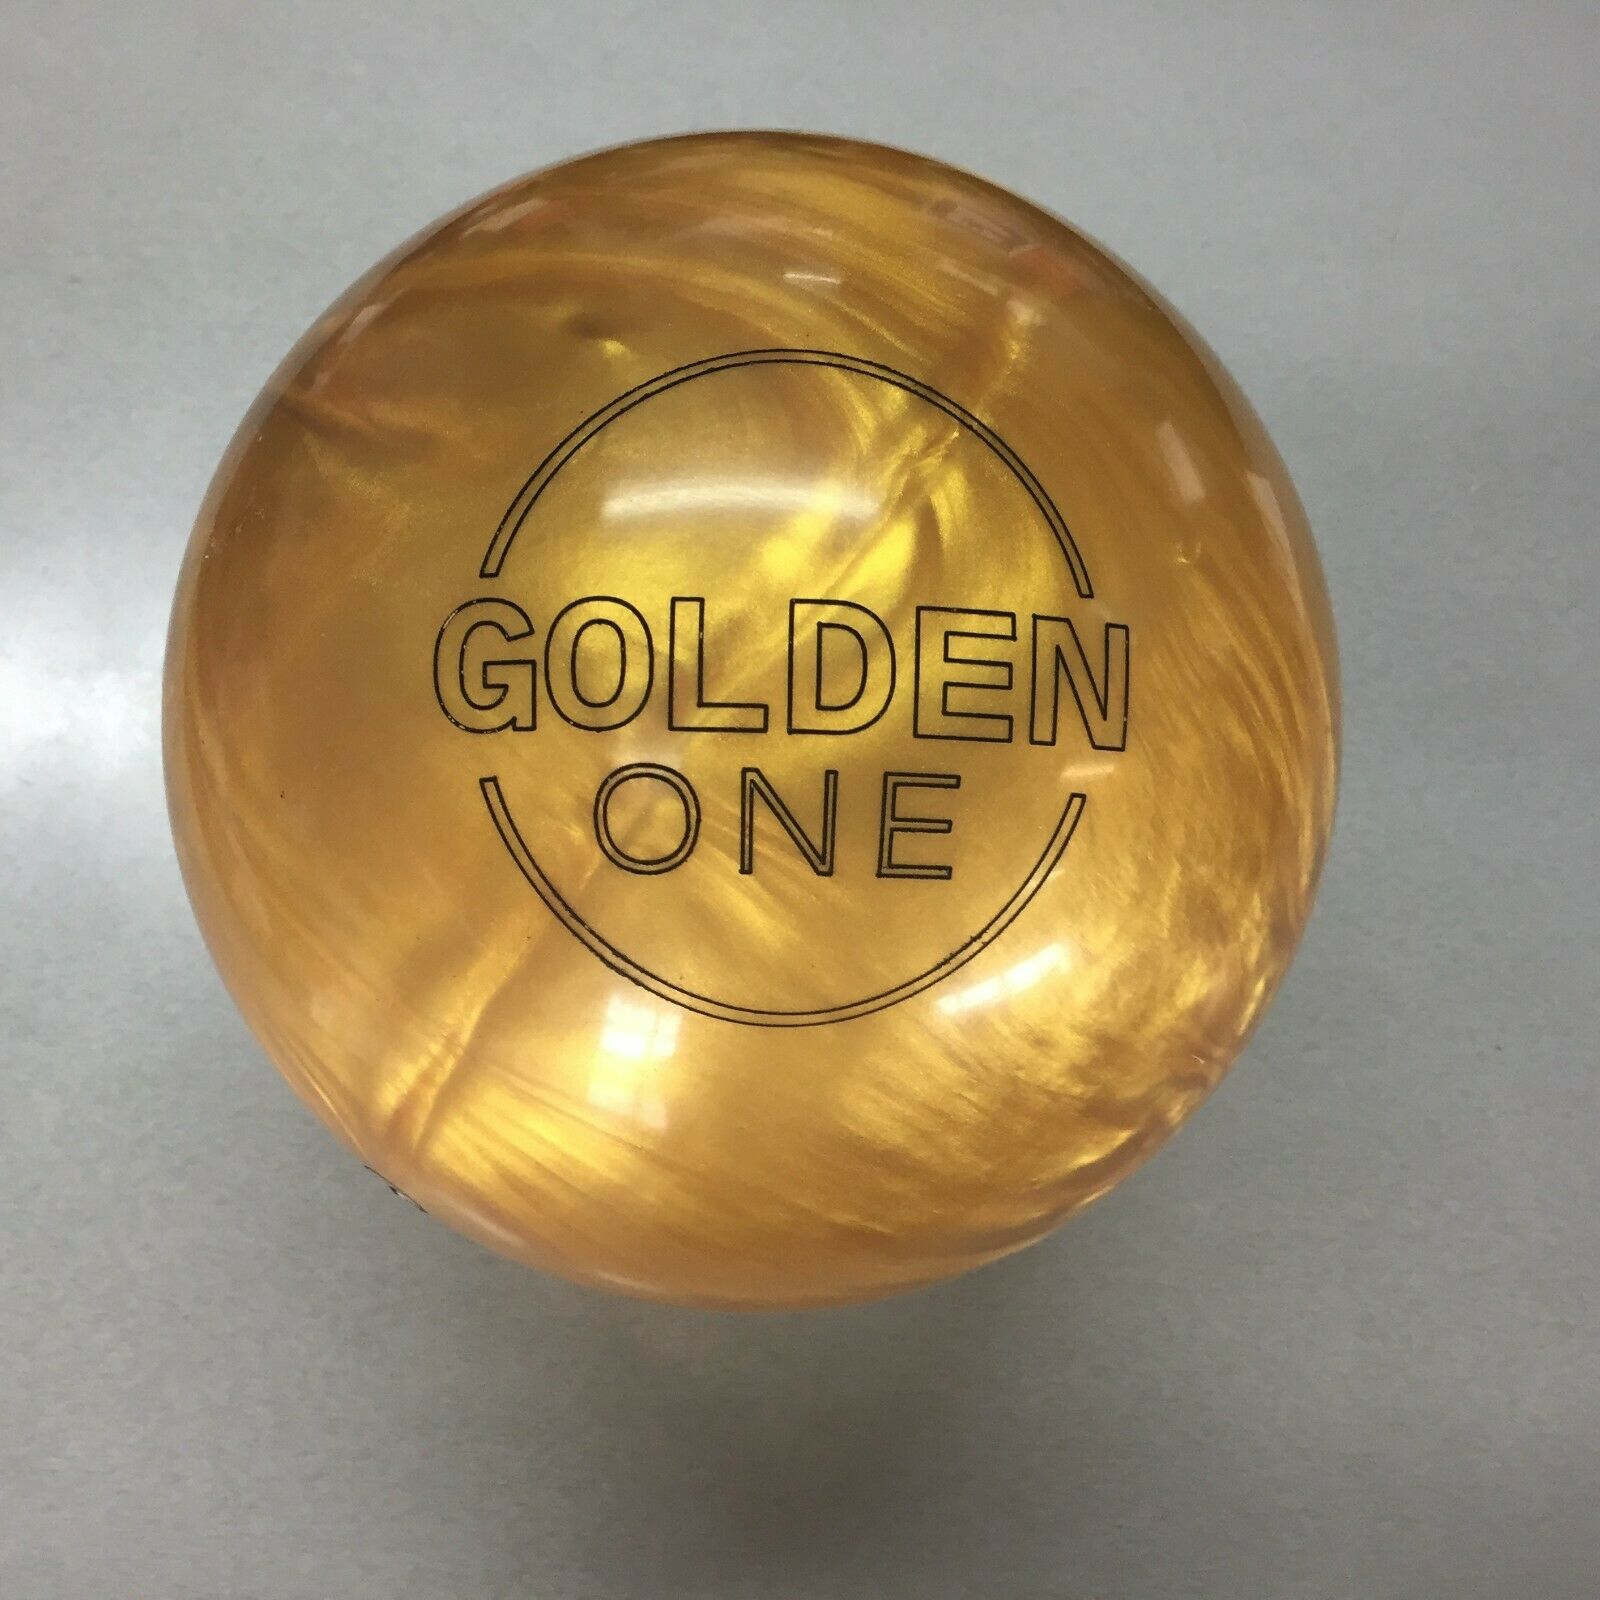 Ebonite Golden One   Bowling  Ball  14 Lb.  1st Quality  Brand New In Box  #473